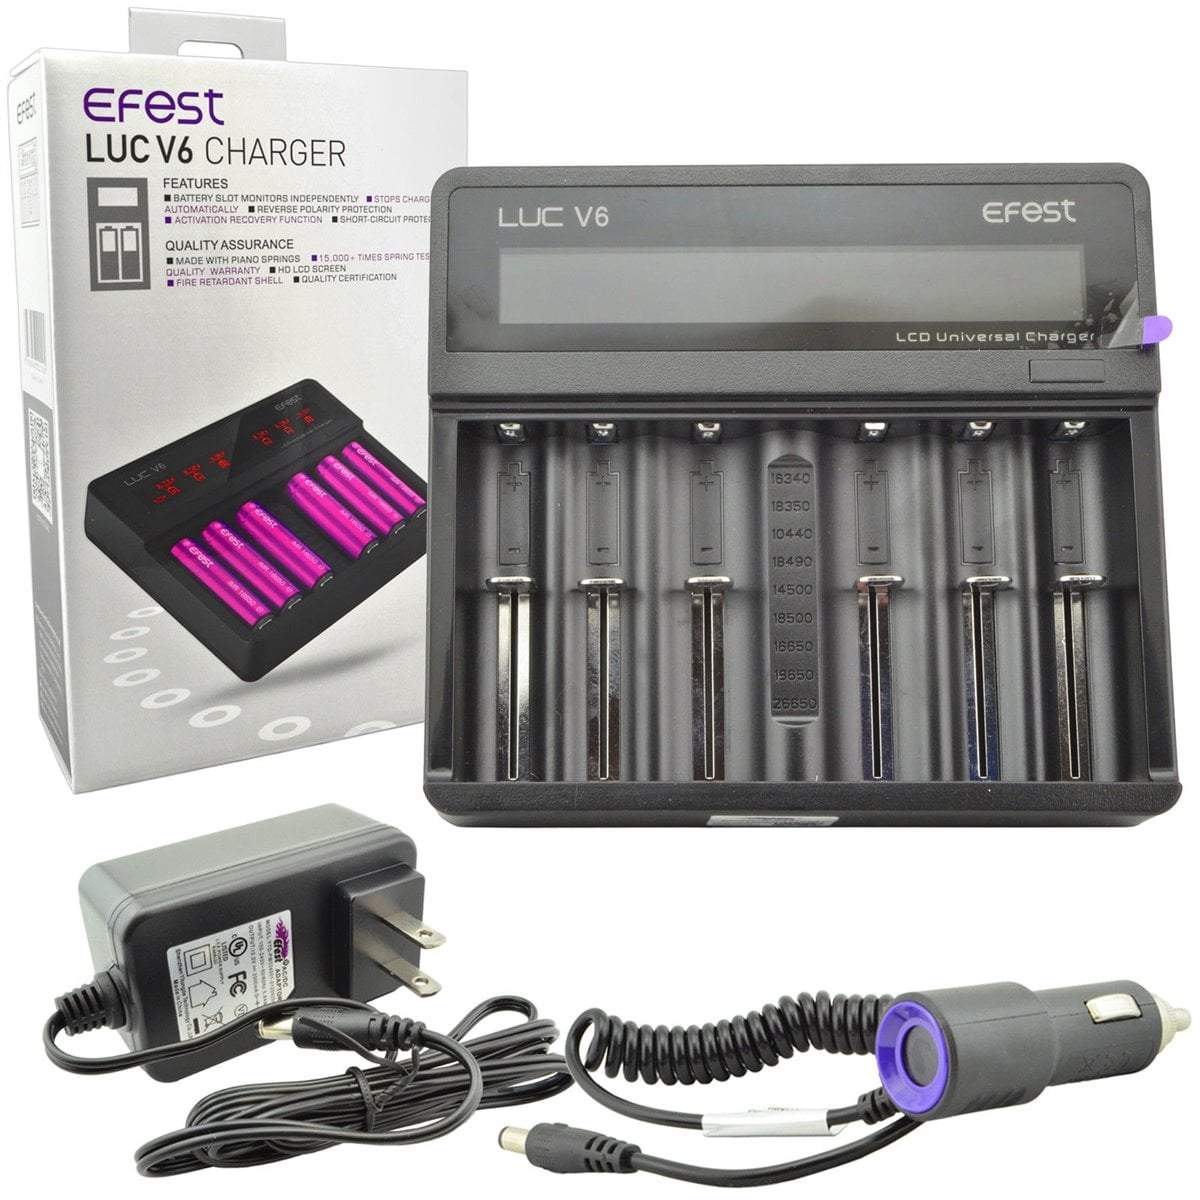 Efest LUC V6 Li ion 6 Bay Charger With Power Bank Function